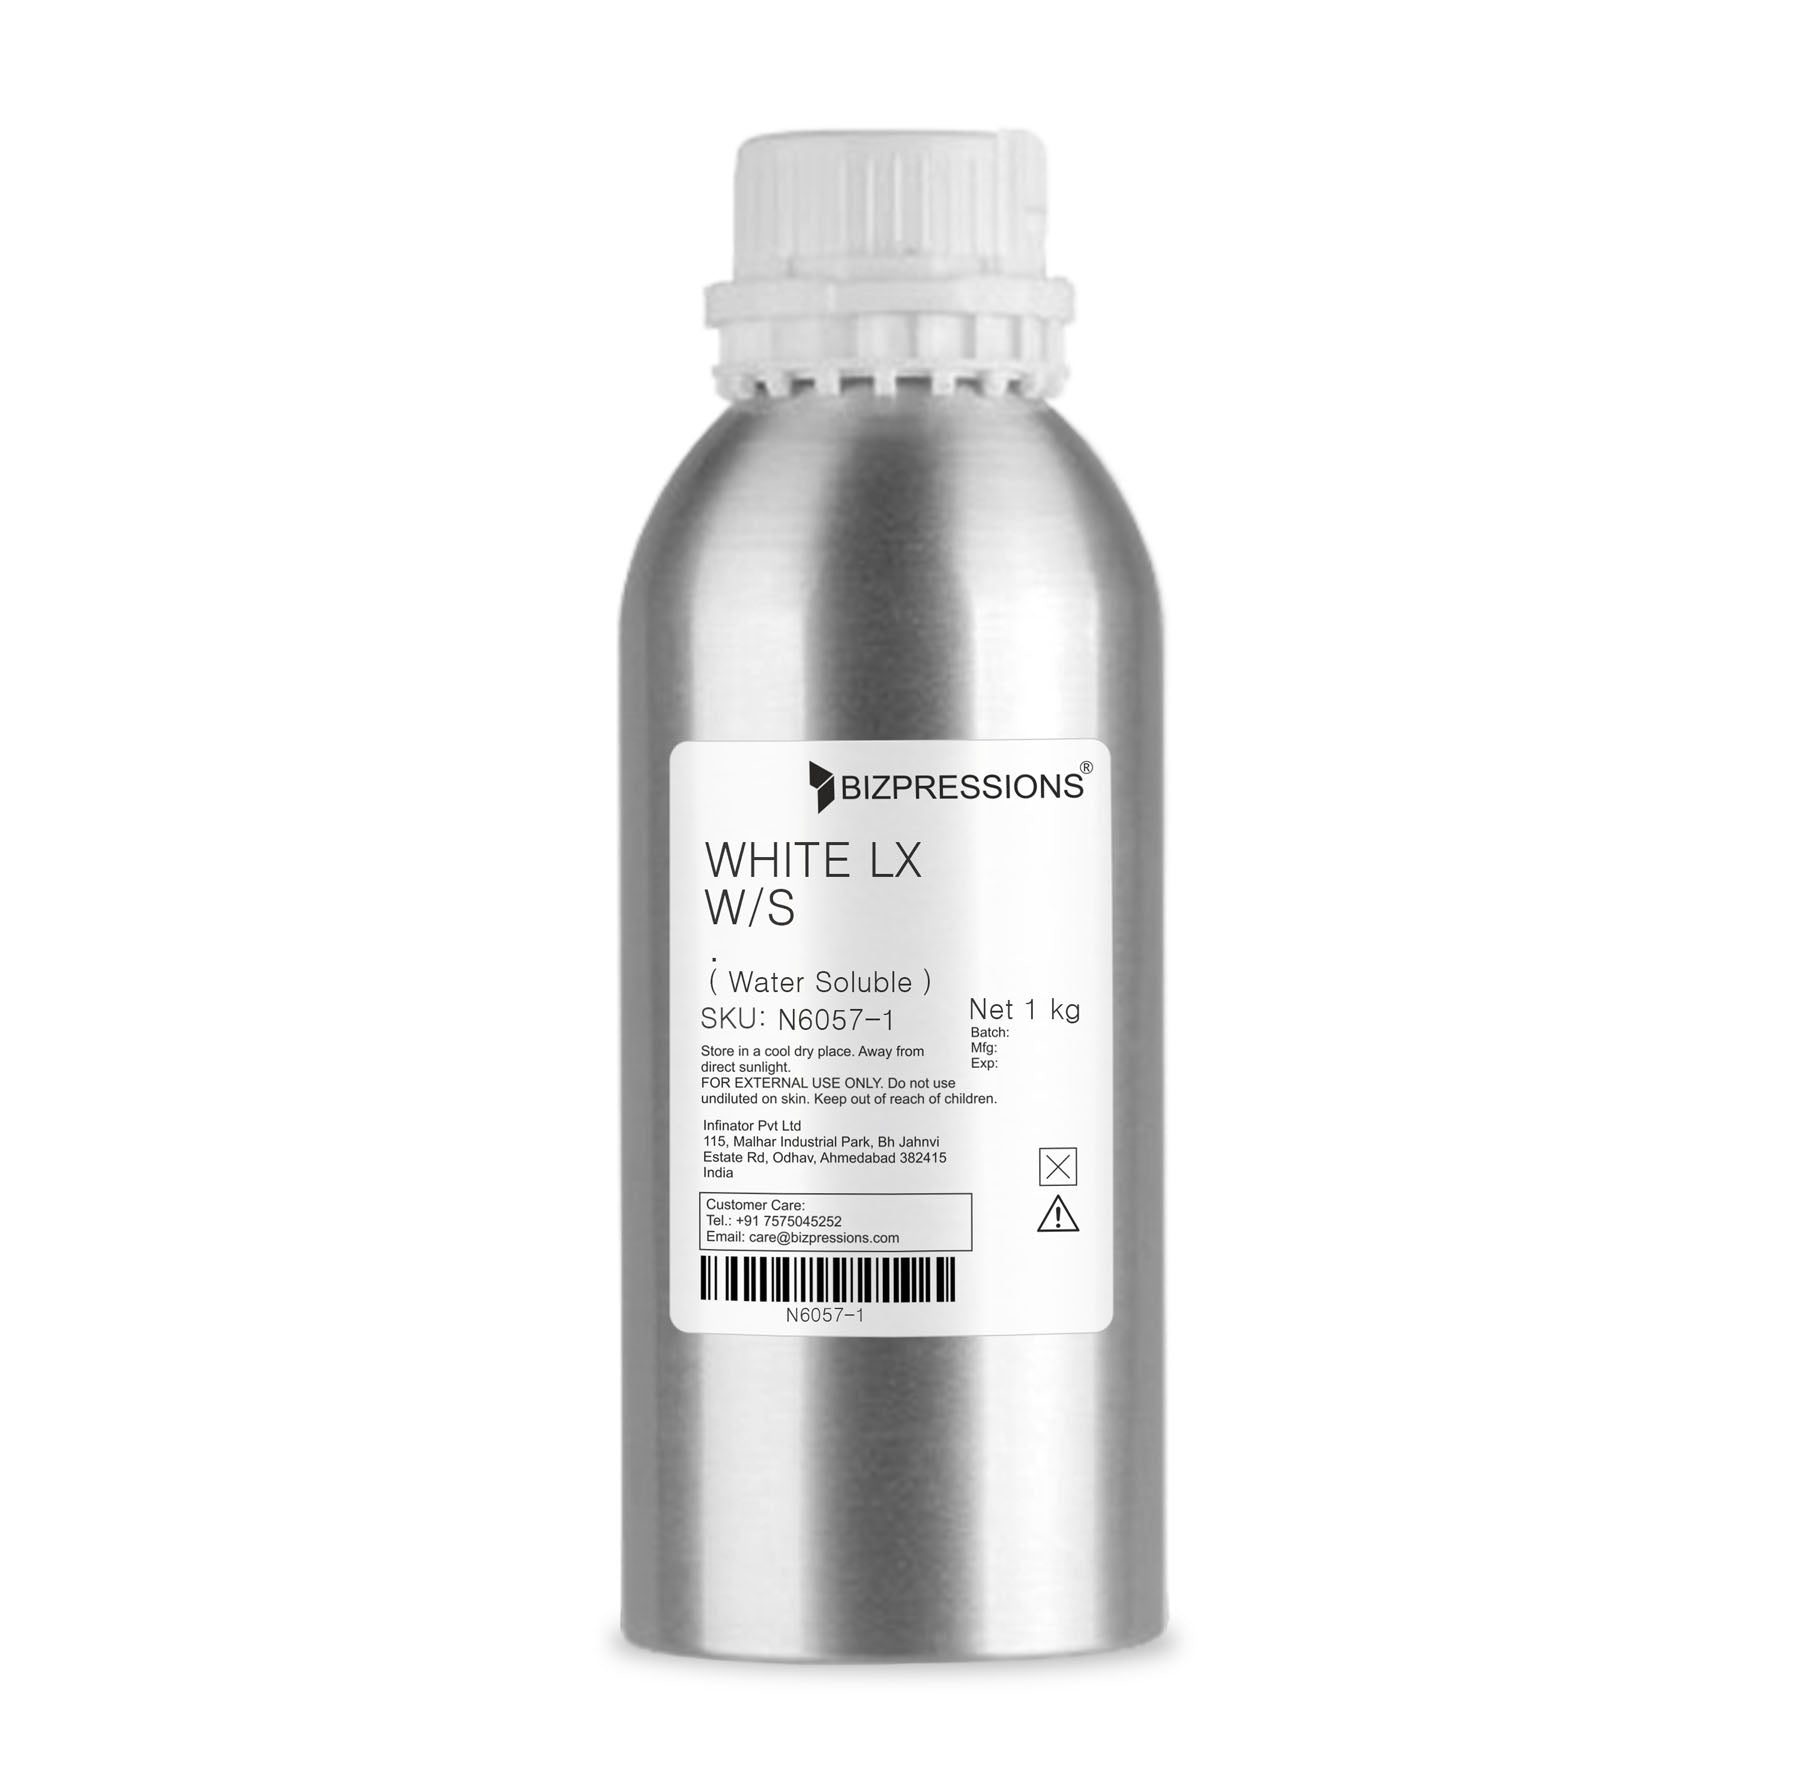 WHITE LX W/S - Fragrance ( Water Soluble ) - 1 kg